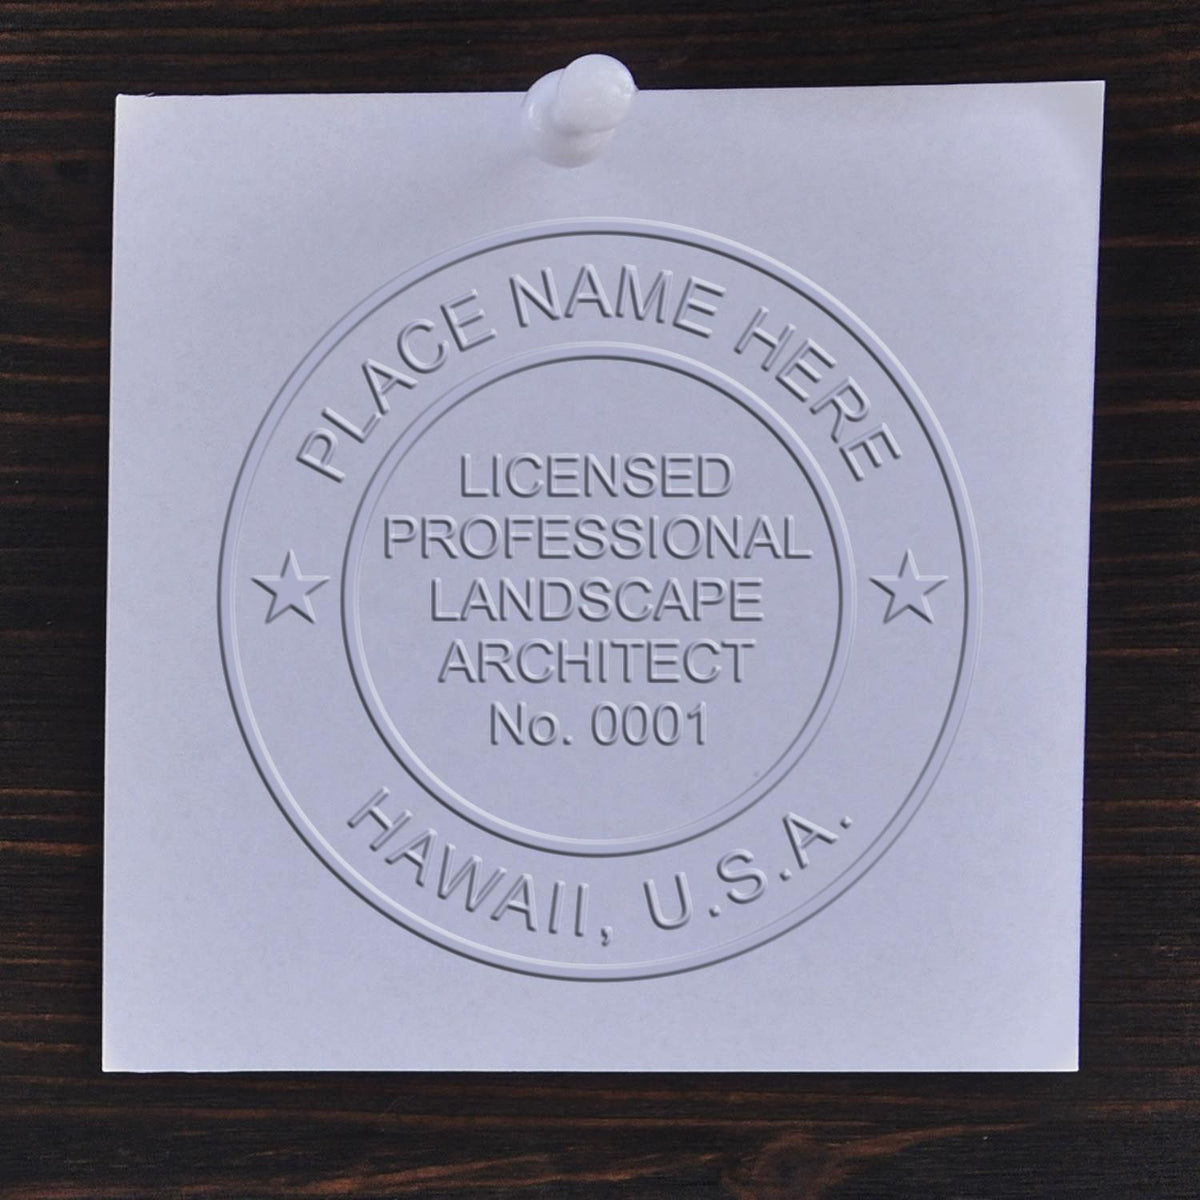 An in use photo of the Hybrid Hawaii Landscape Architect Seal showing a sample imprint on a cardstock